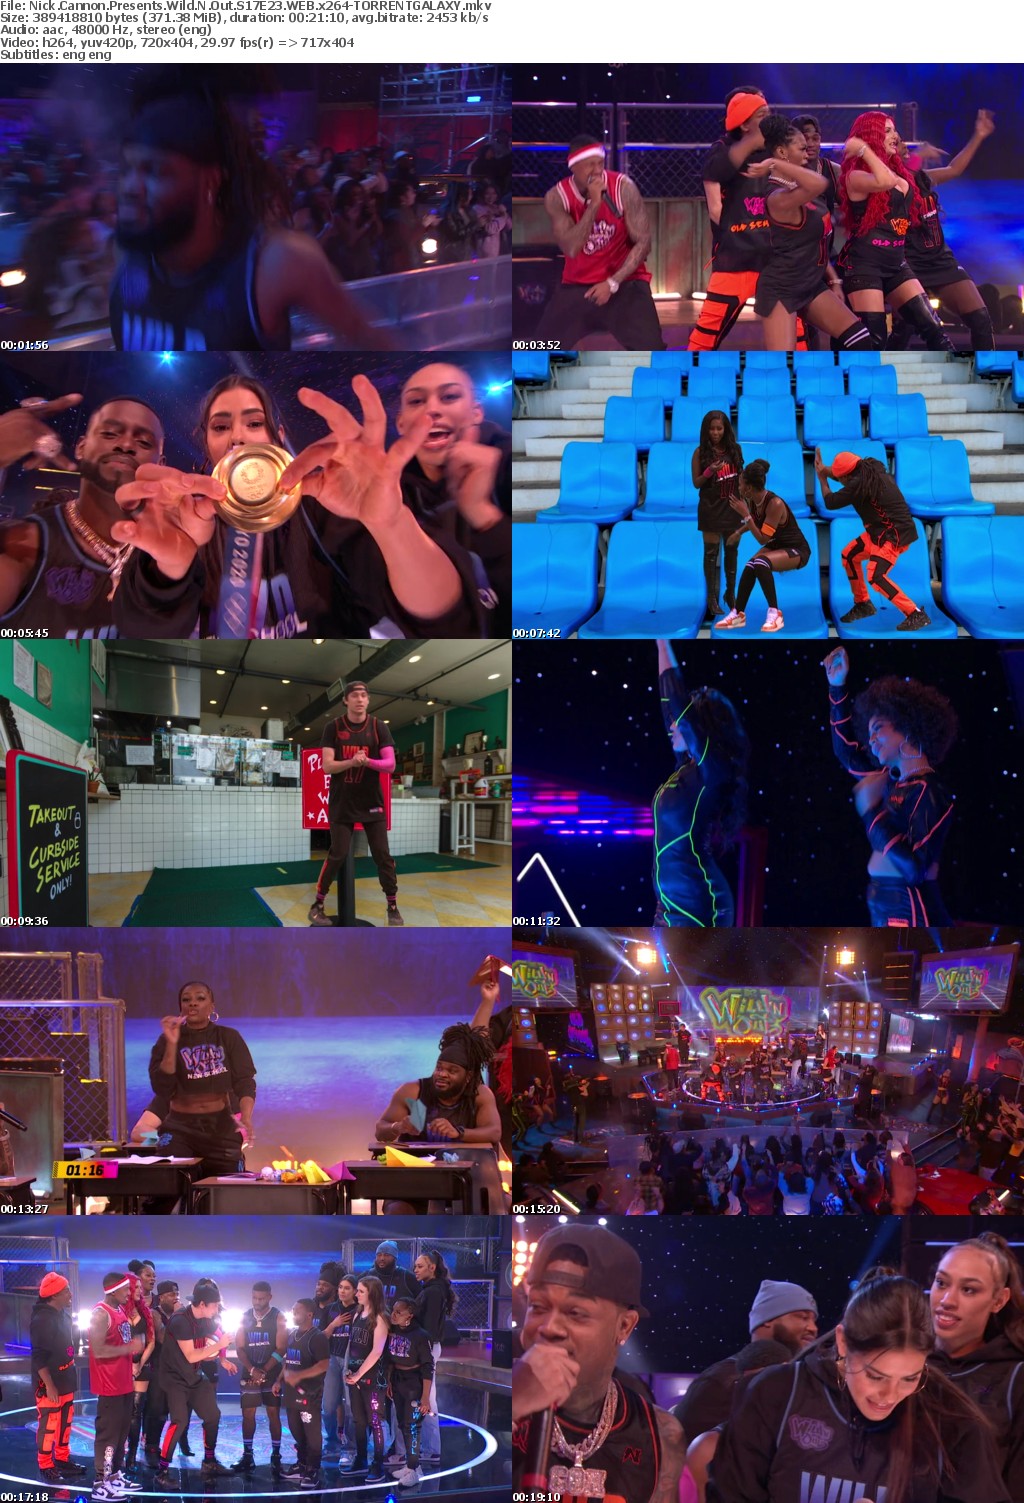 Nick Cannon Presents Wild N Out S17E23 WEB x264-GALAXY